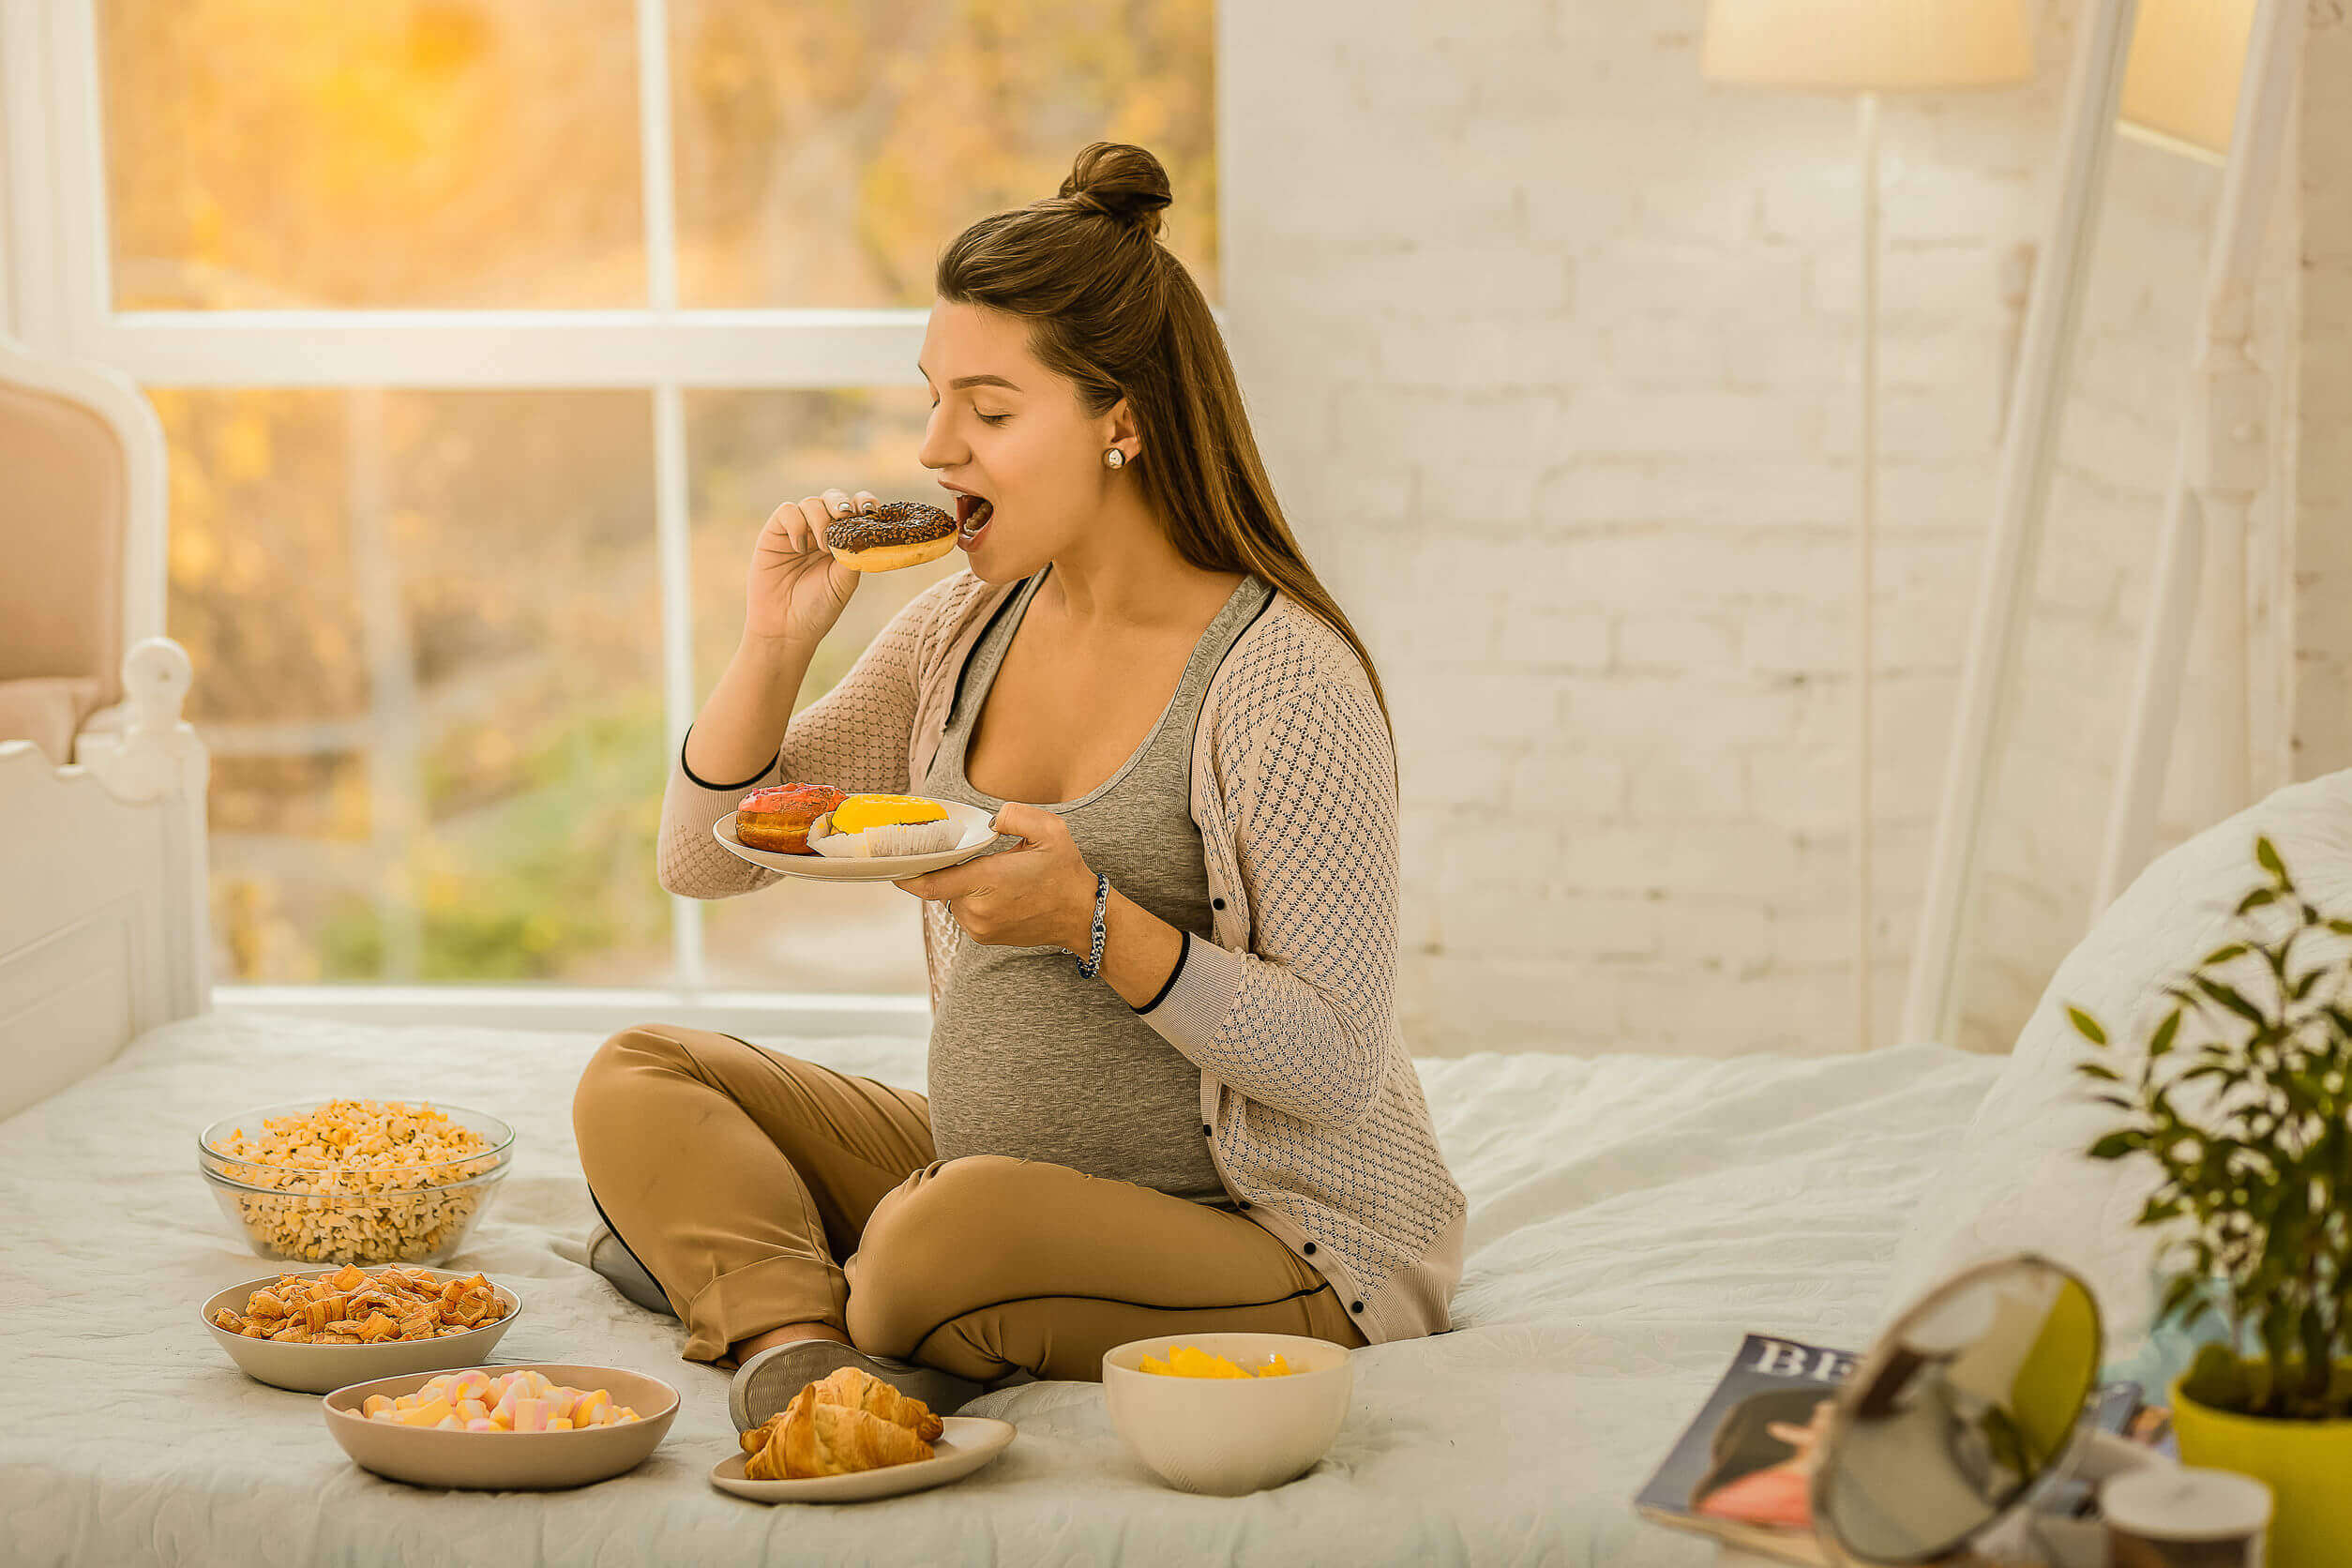 A pregnant woman witting in bed eating sweets.